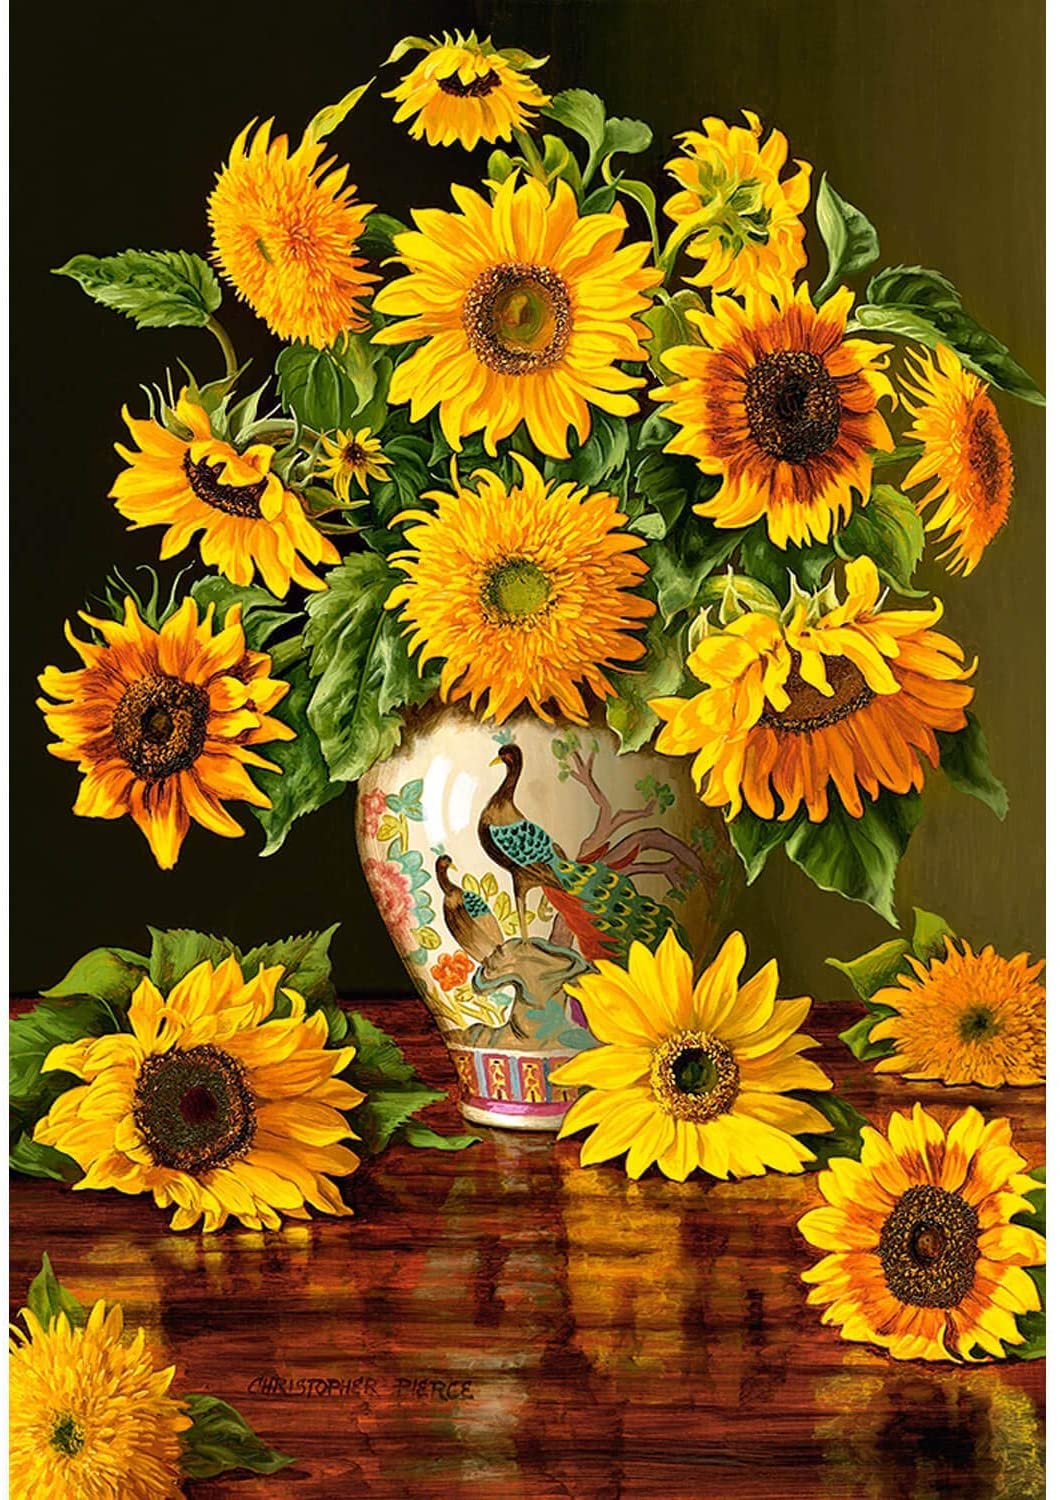 Sunflowers In Peacock Vase (1000 pieces)